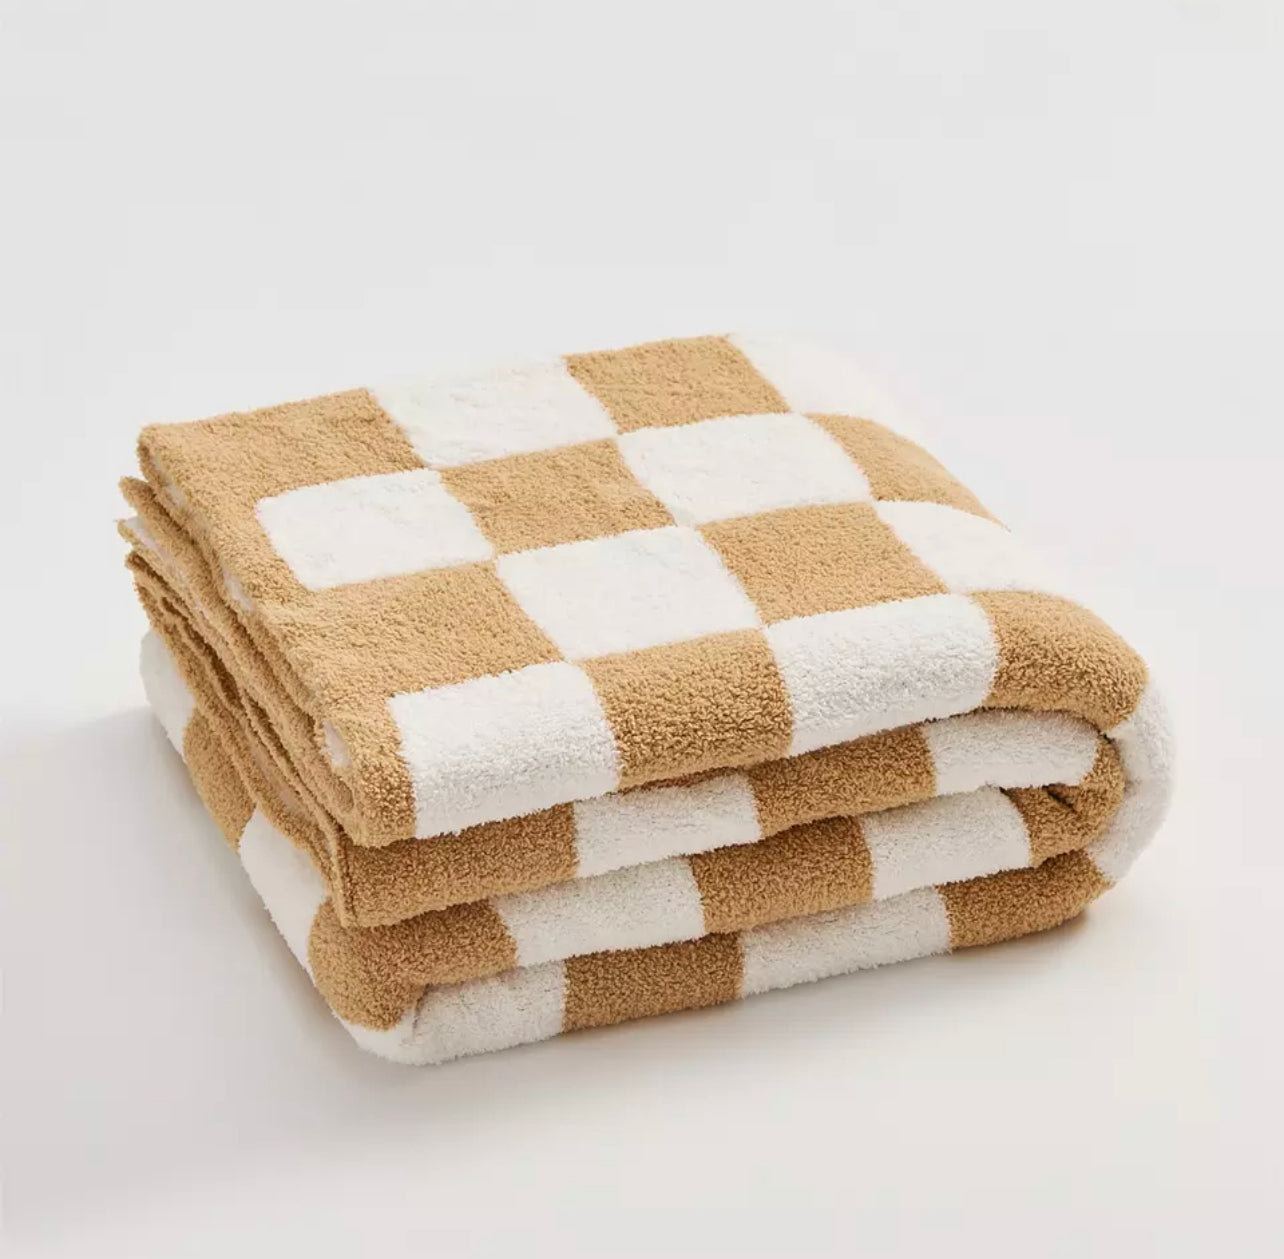 Checker board knit blanket (more colors and sizes)